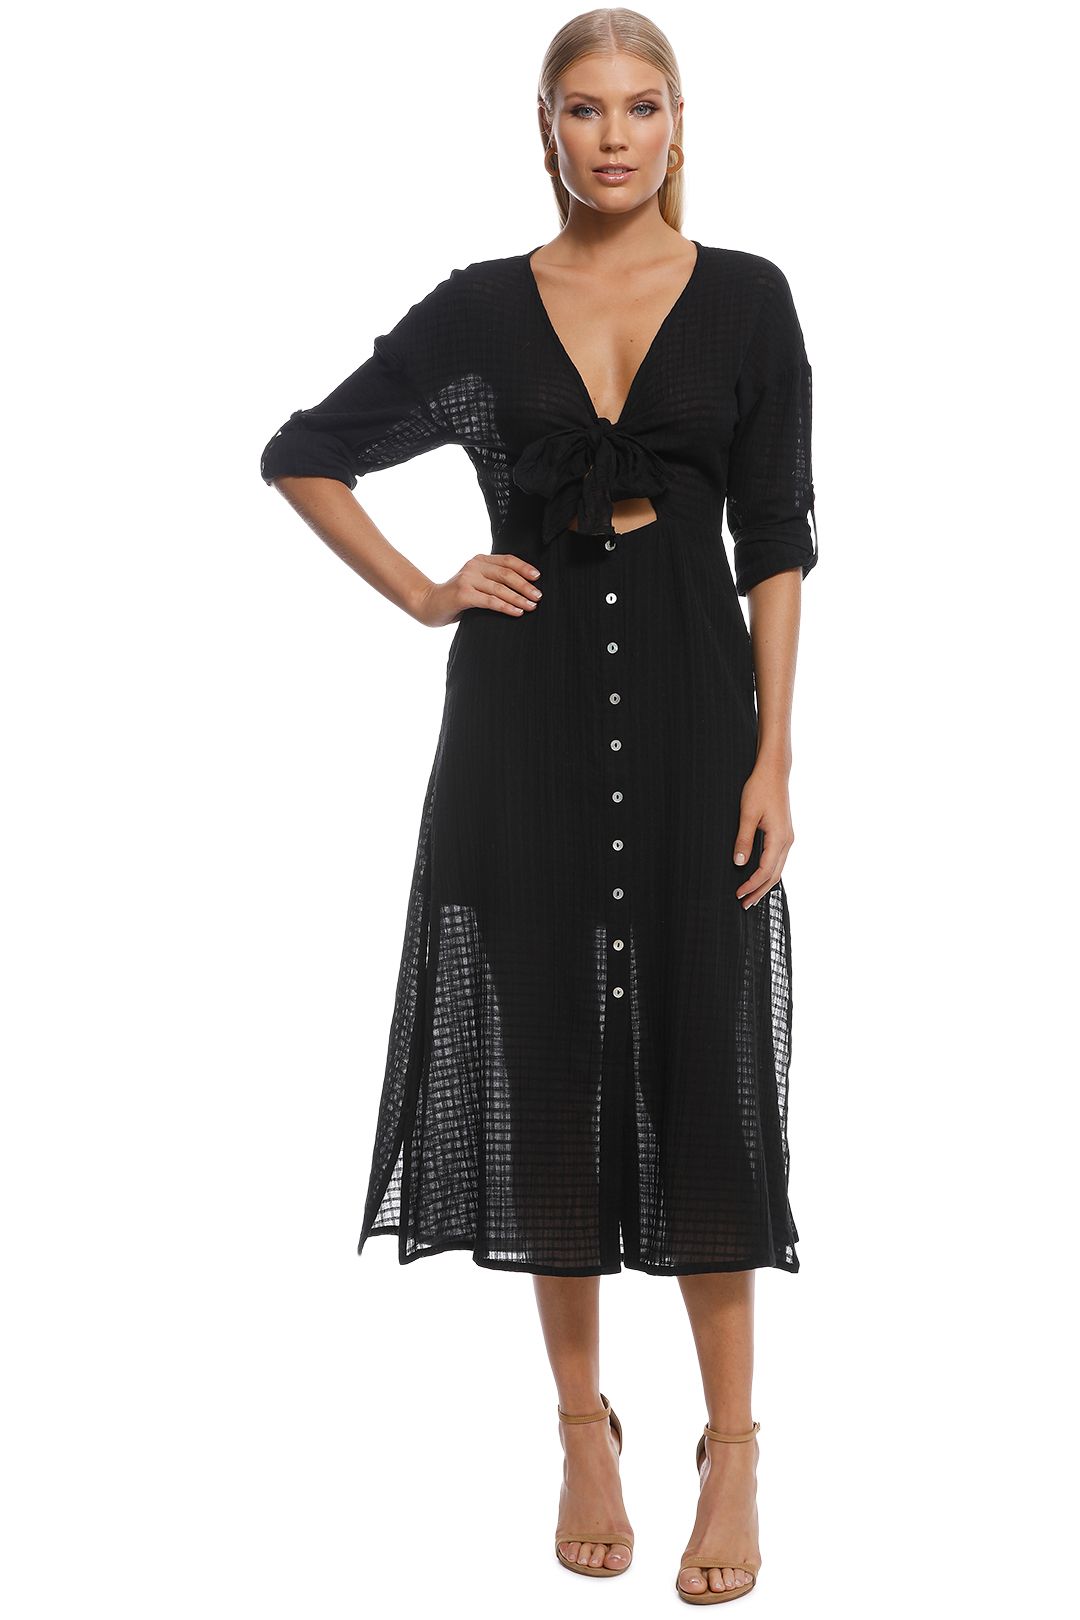 Eclipse Tie Front Midi Dress in Black Leaf by Suboo for Rent | GlamCorner